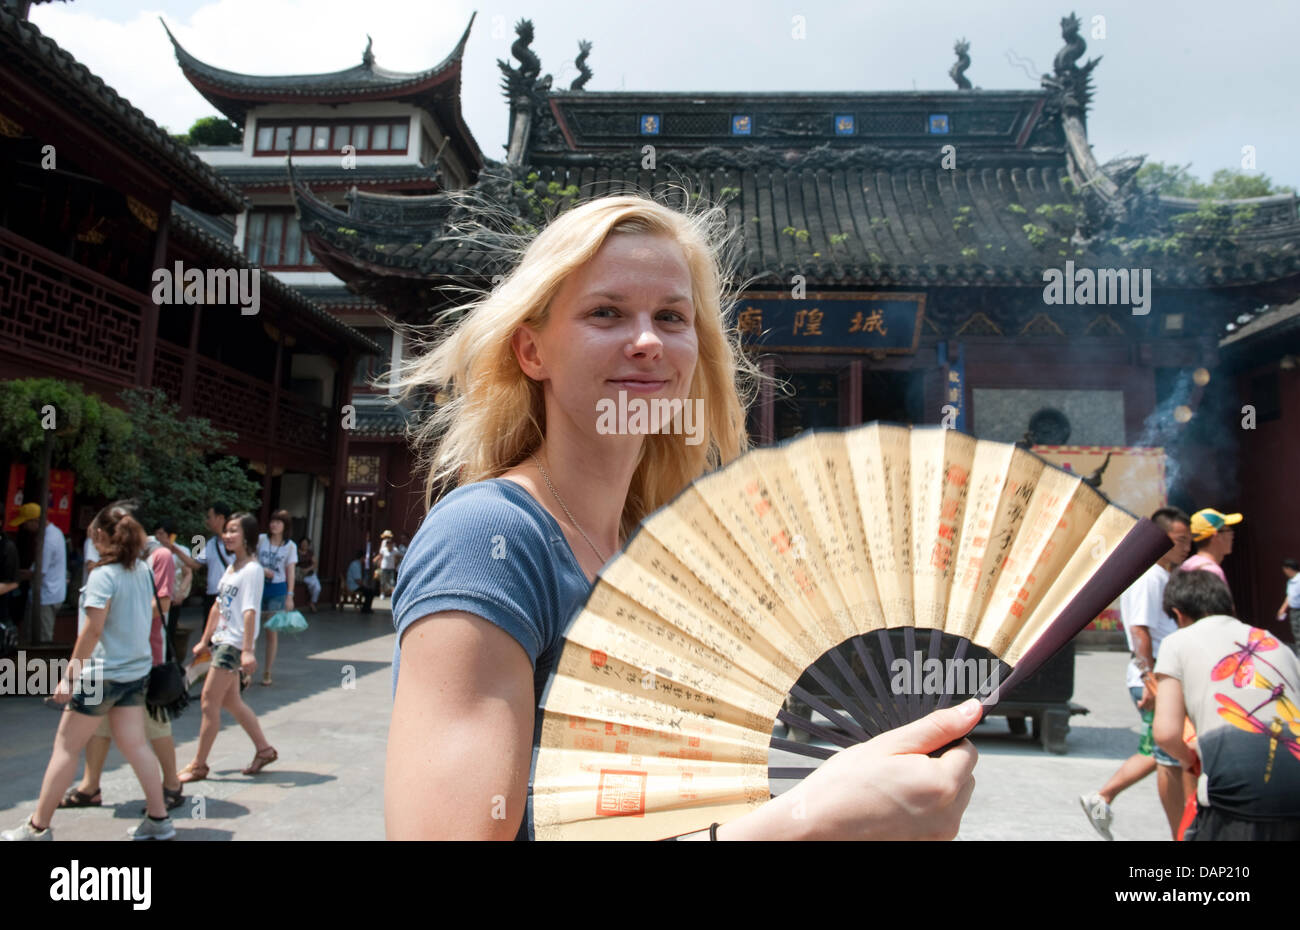 The picture made available 20 July 2011 shows German swimmer Britta Steffen is flattering an air wheel during a visit of the Cheng Huang Miao Temple in the Yu Garden prior to the 2011 FINA World Swimming Championships in Shanghai, China, 18 July 2011. Photo: Bernd Thissen dpa  +++(c) dpa - Bildfunk+++ Stock Photo